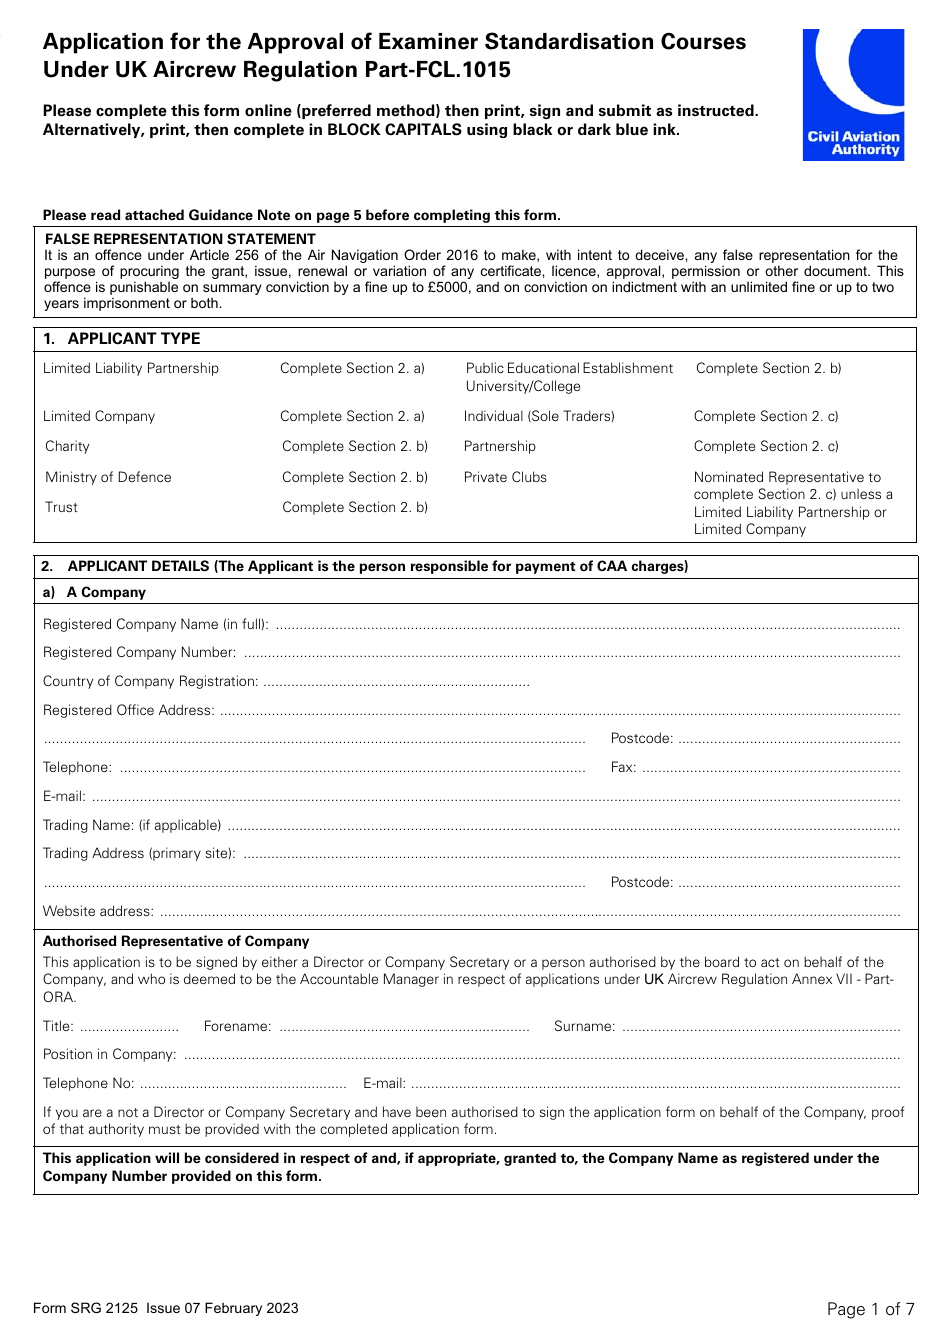 Form SRG2125 Application for the Approval of Examiner Standardisation Courses Under UK Aircrew Regulation Part-Fcl.1015 - United Kingdom, Page 1